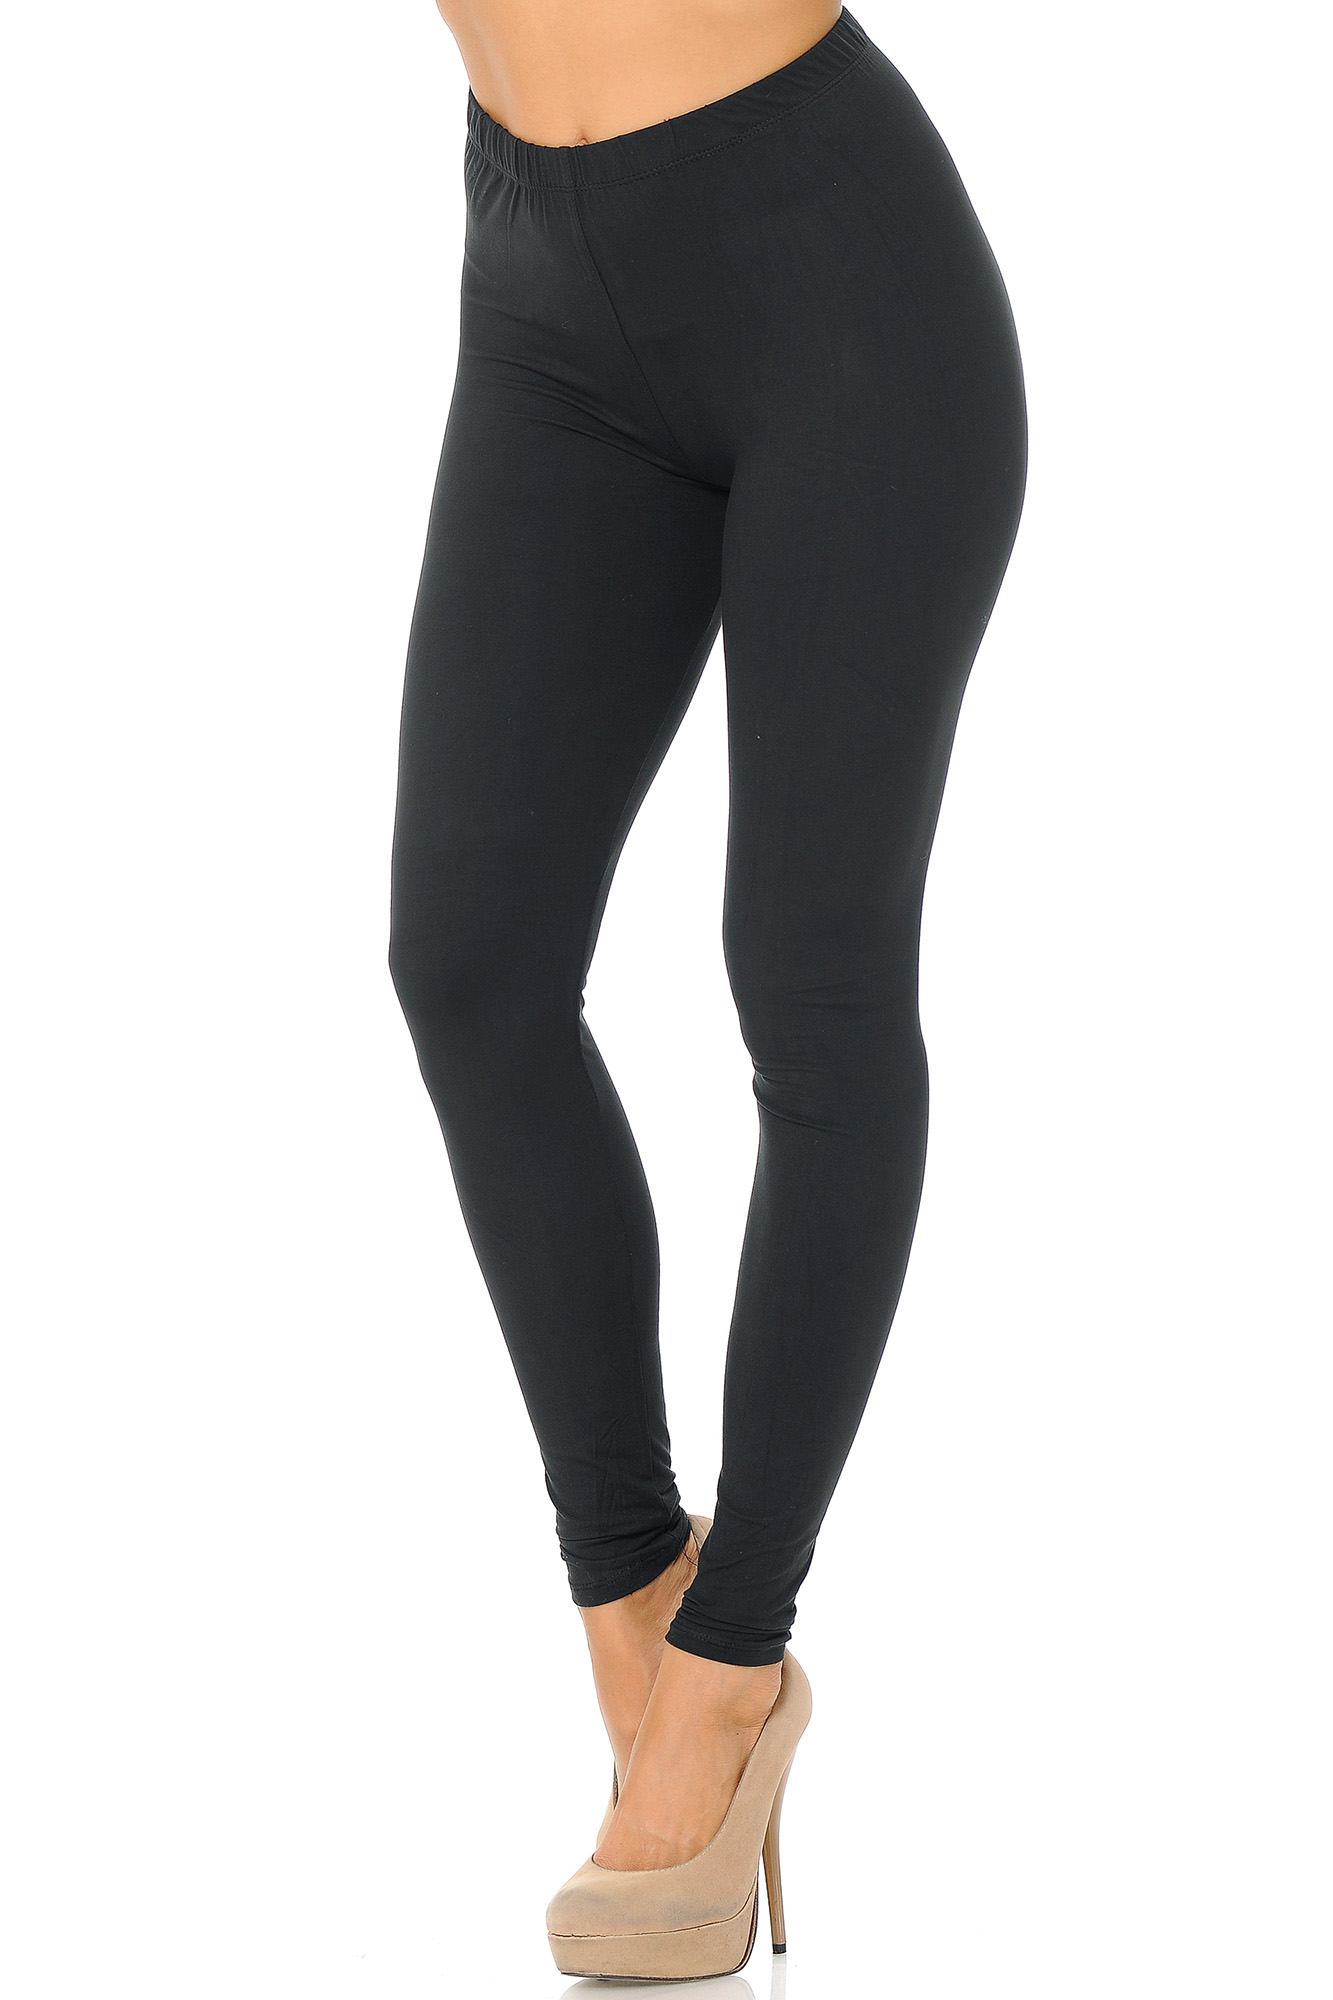 Recycle Polyester Leggings Manufacturer Wholesale in China - NDH